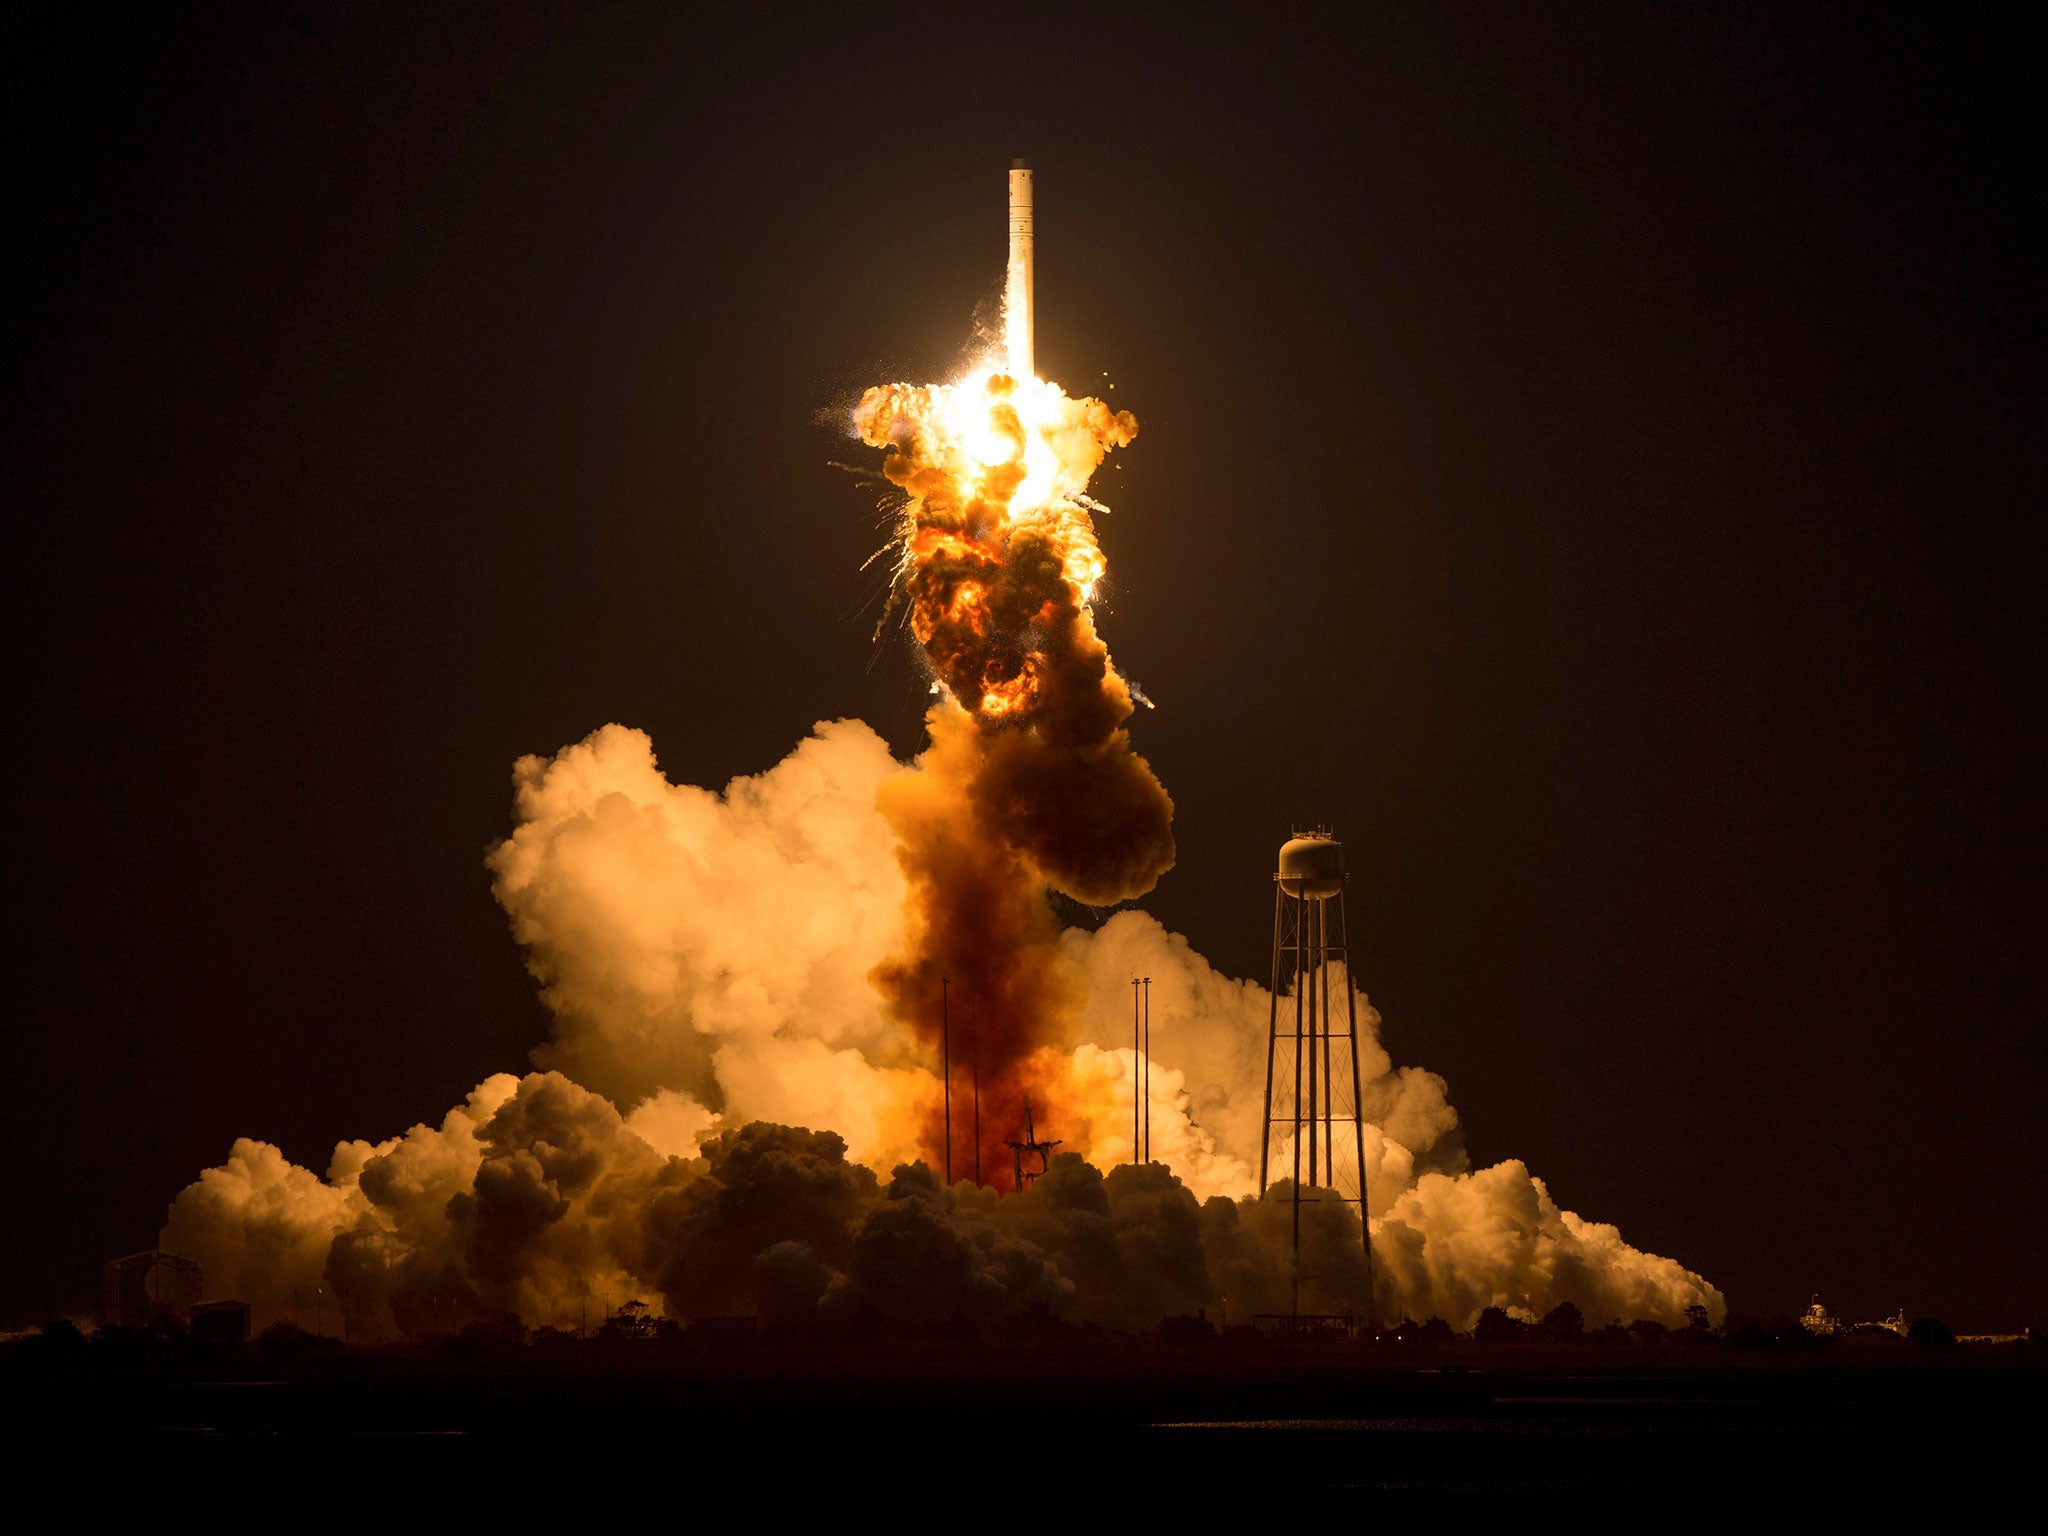 Nasa's Antares rocket exploded seconds after its launch in Virginia